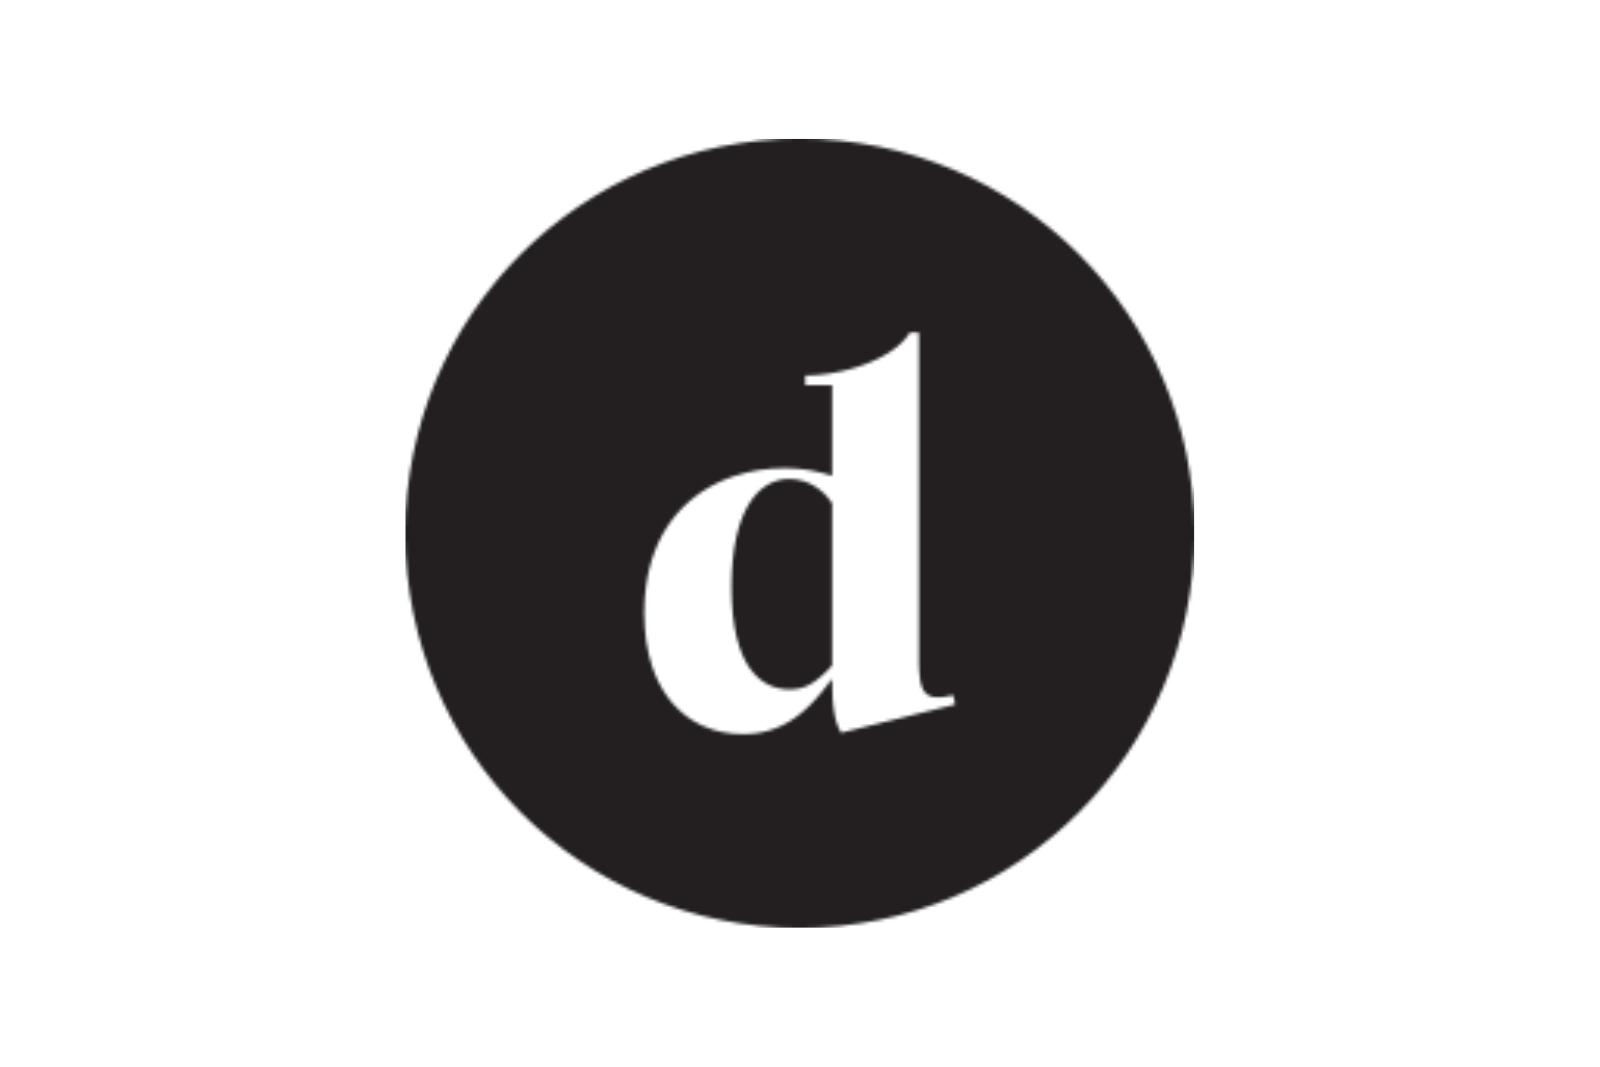 A lowercase d in the center of a circle.